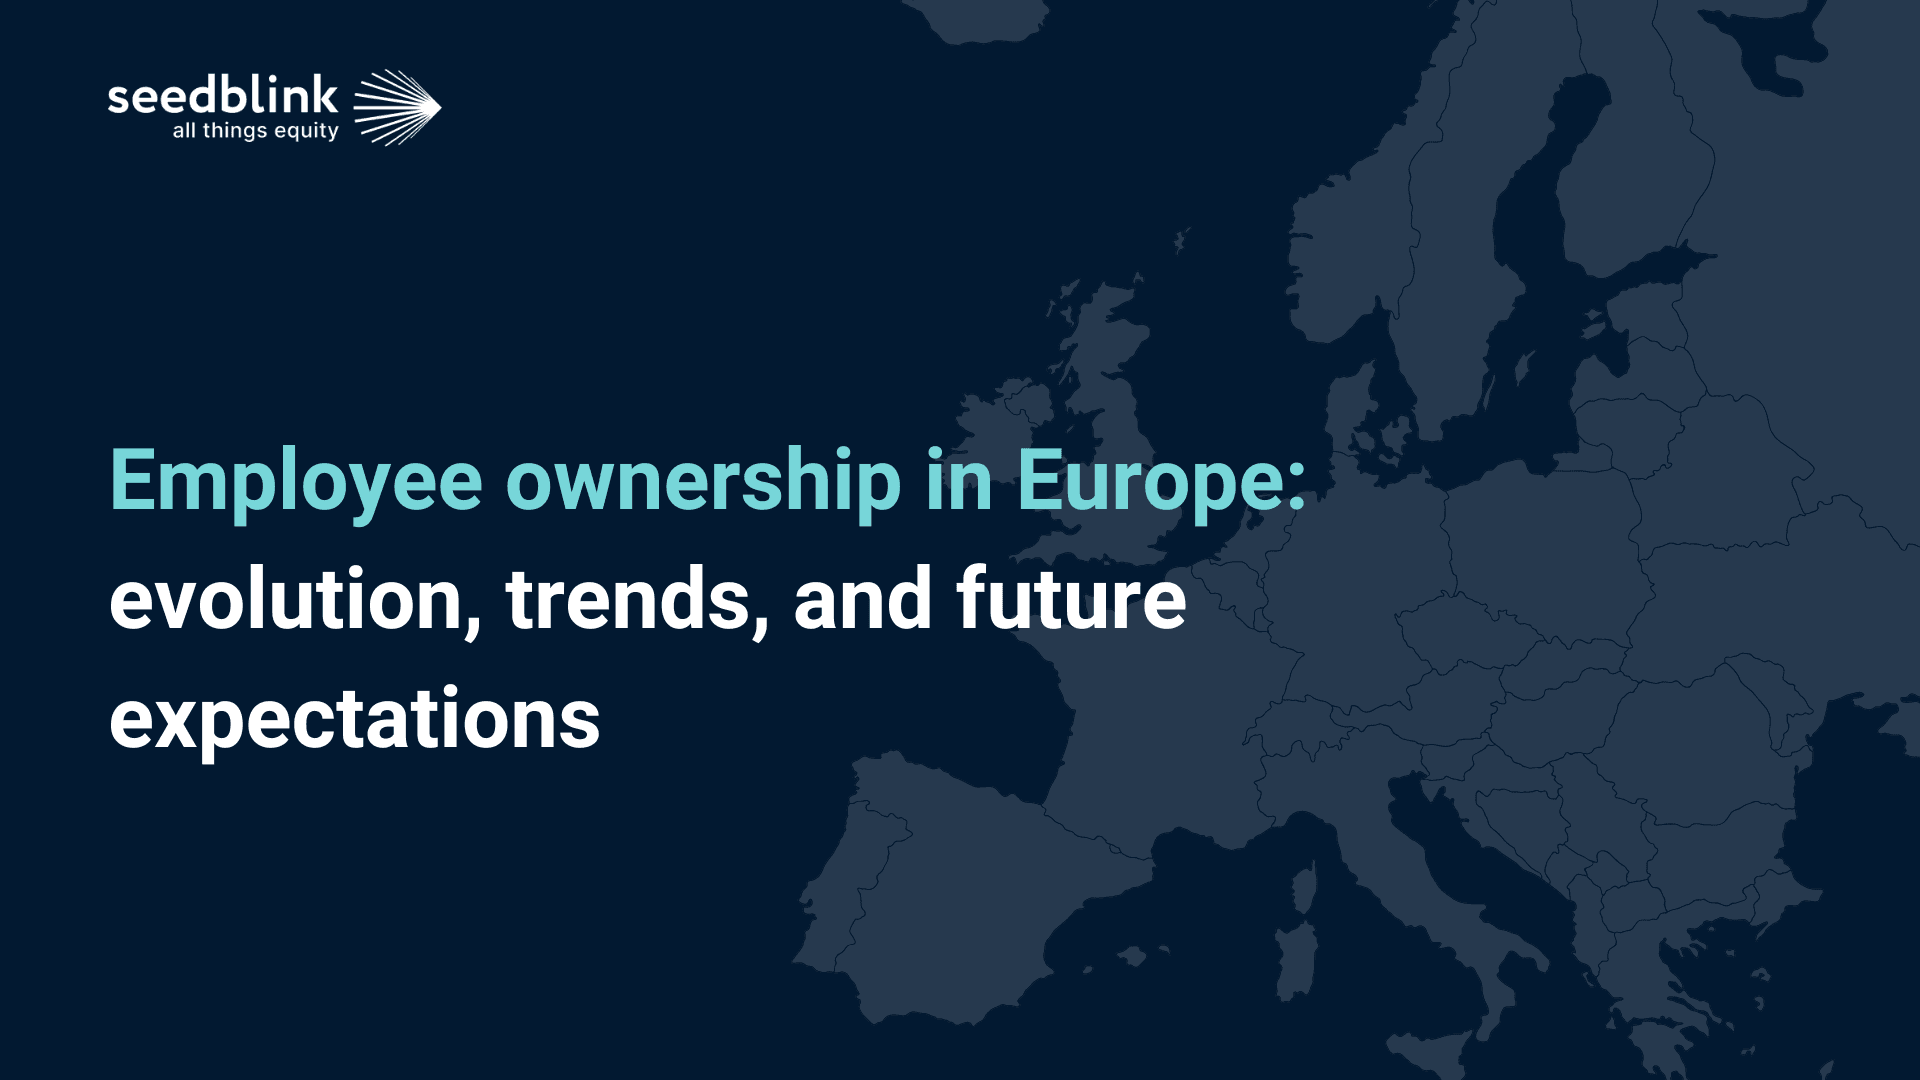 Employee ownership in Europe: evolution, trends, and future expectations